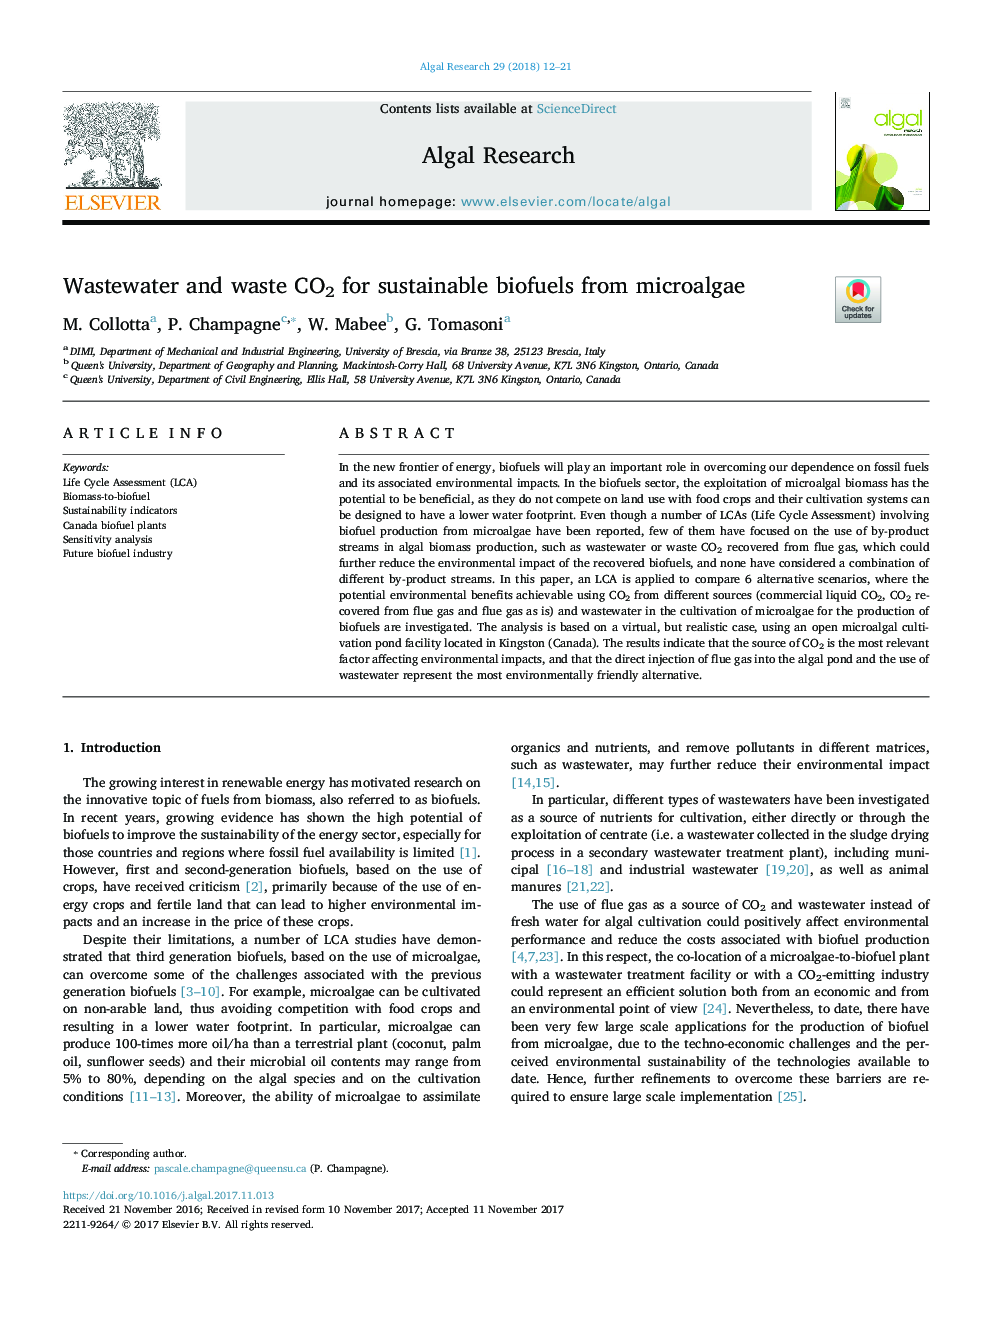 Wastewater and waste CO2 for sustainable biofuels from microalgae